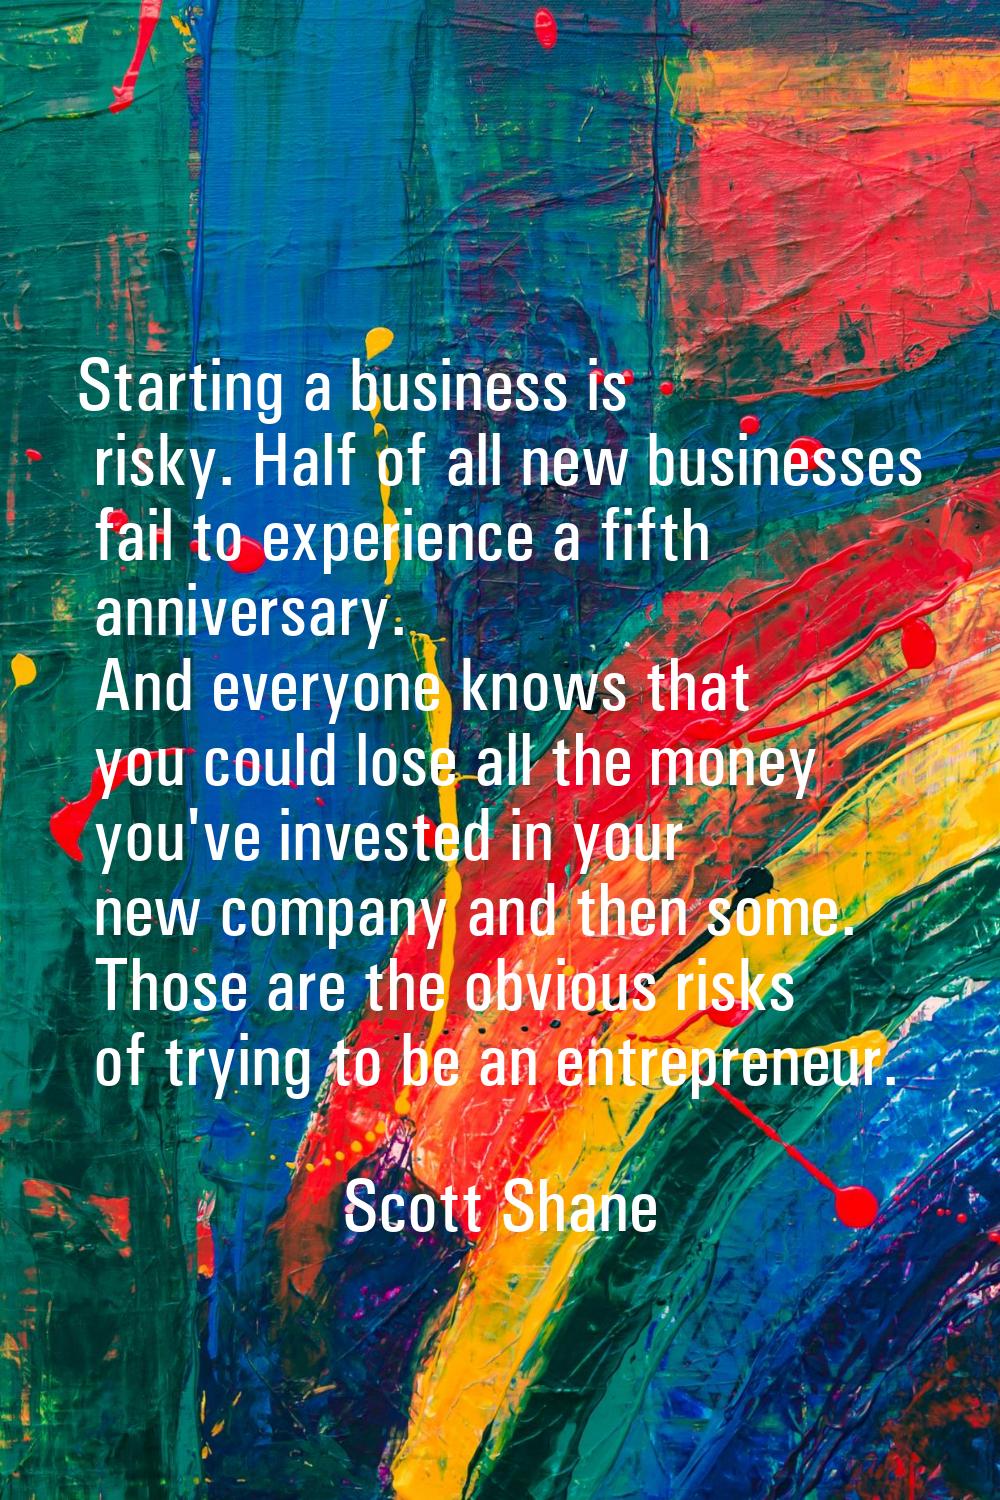 Starting a business is risky. Half of all new businesses fail to experience a fifth anniversary. An